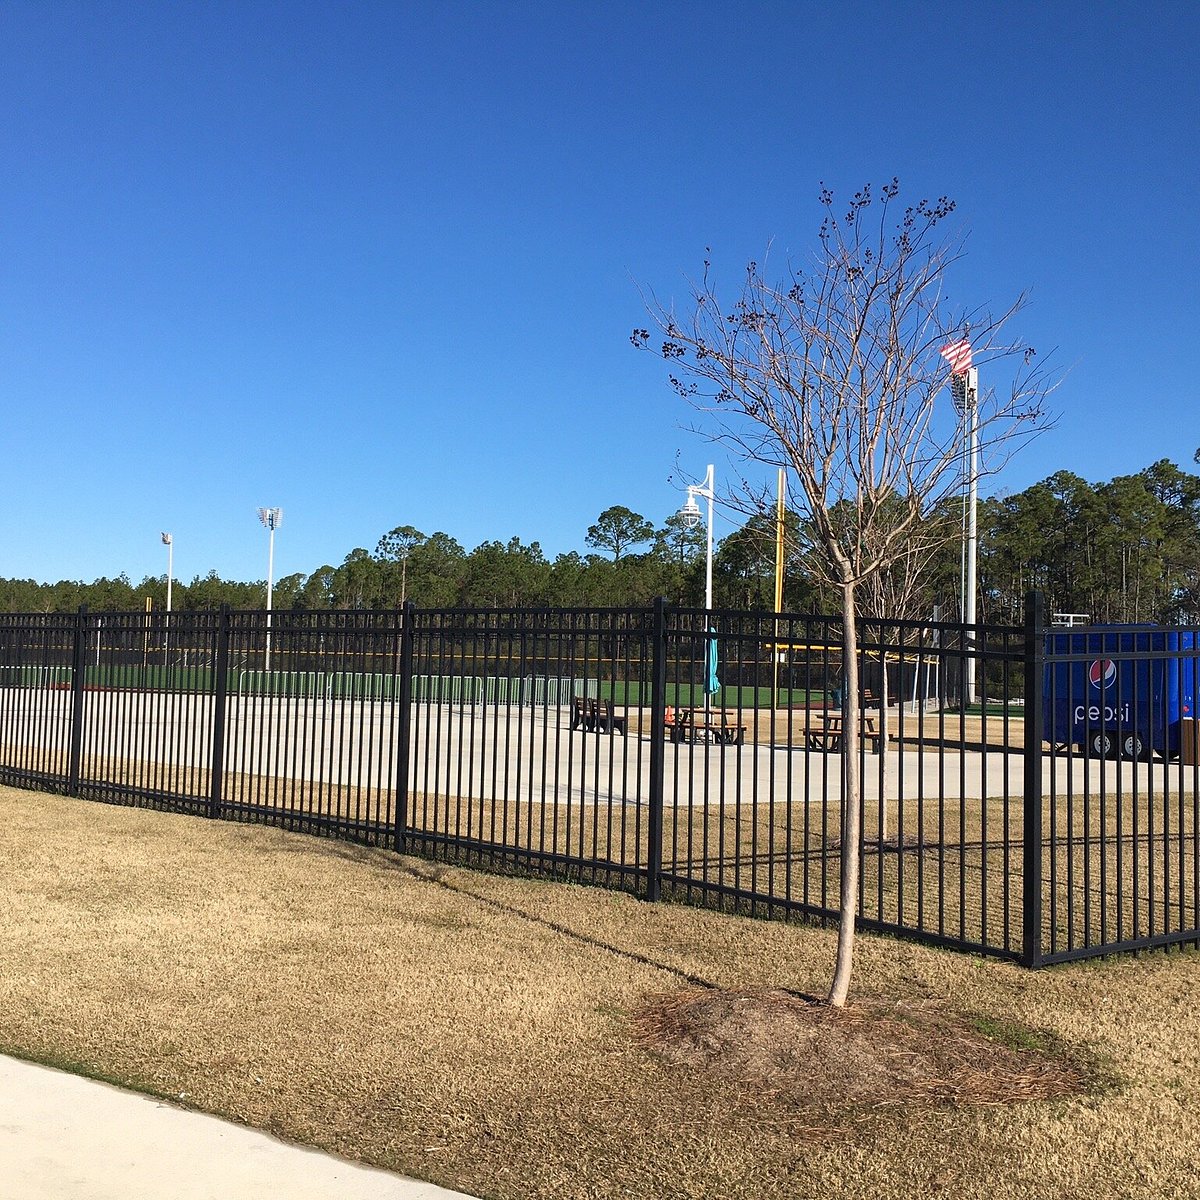 Panama City park adds an exercise area